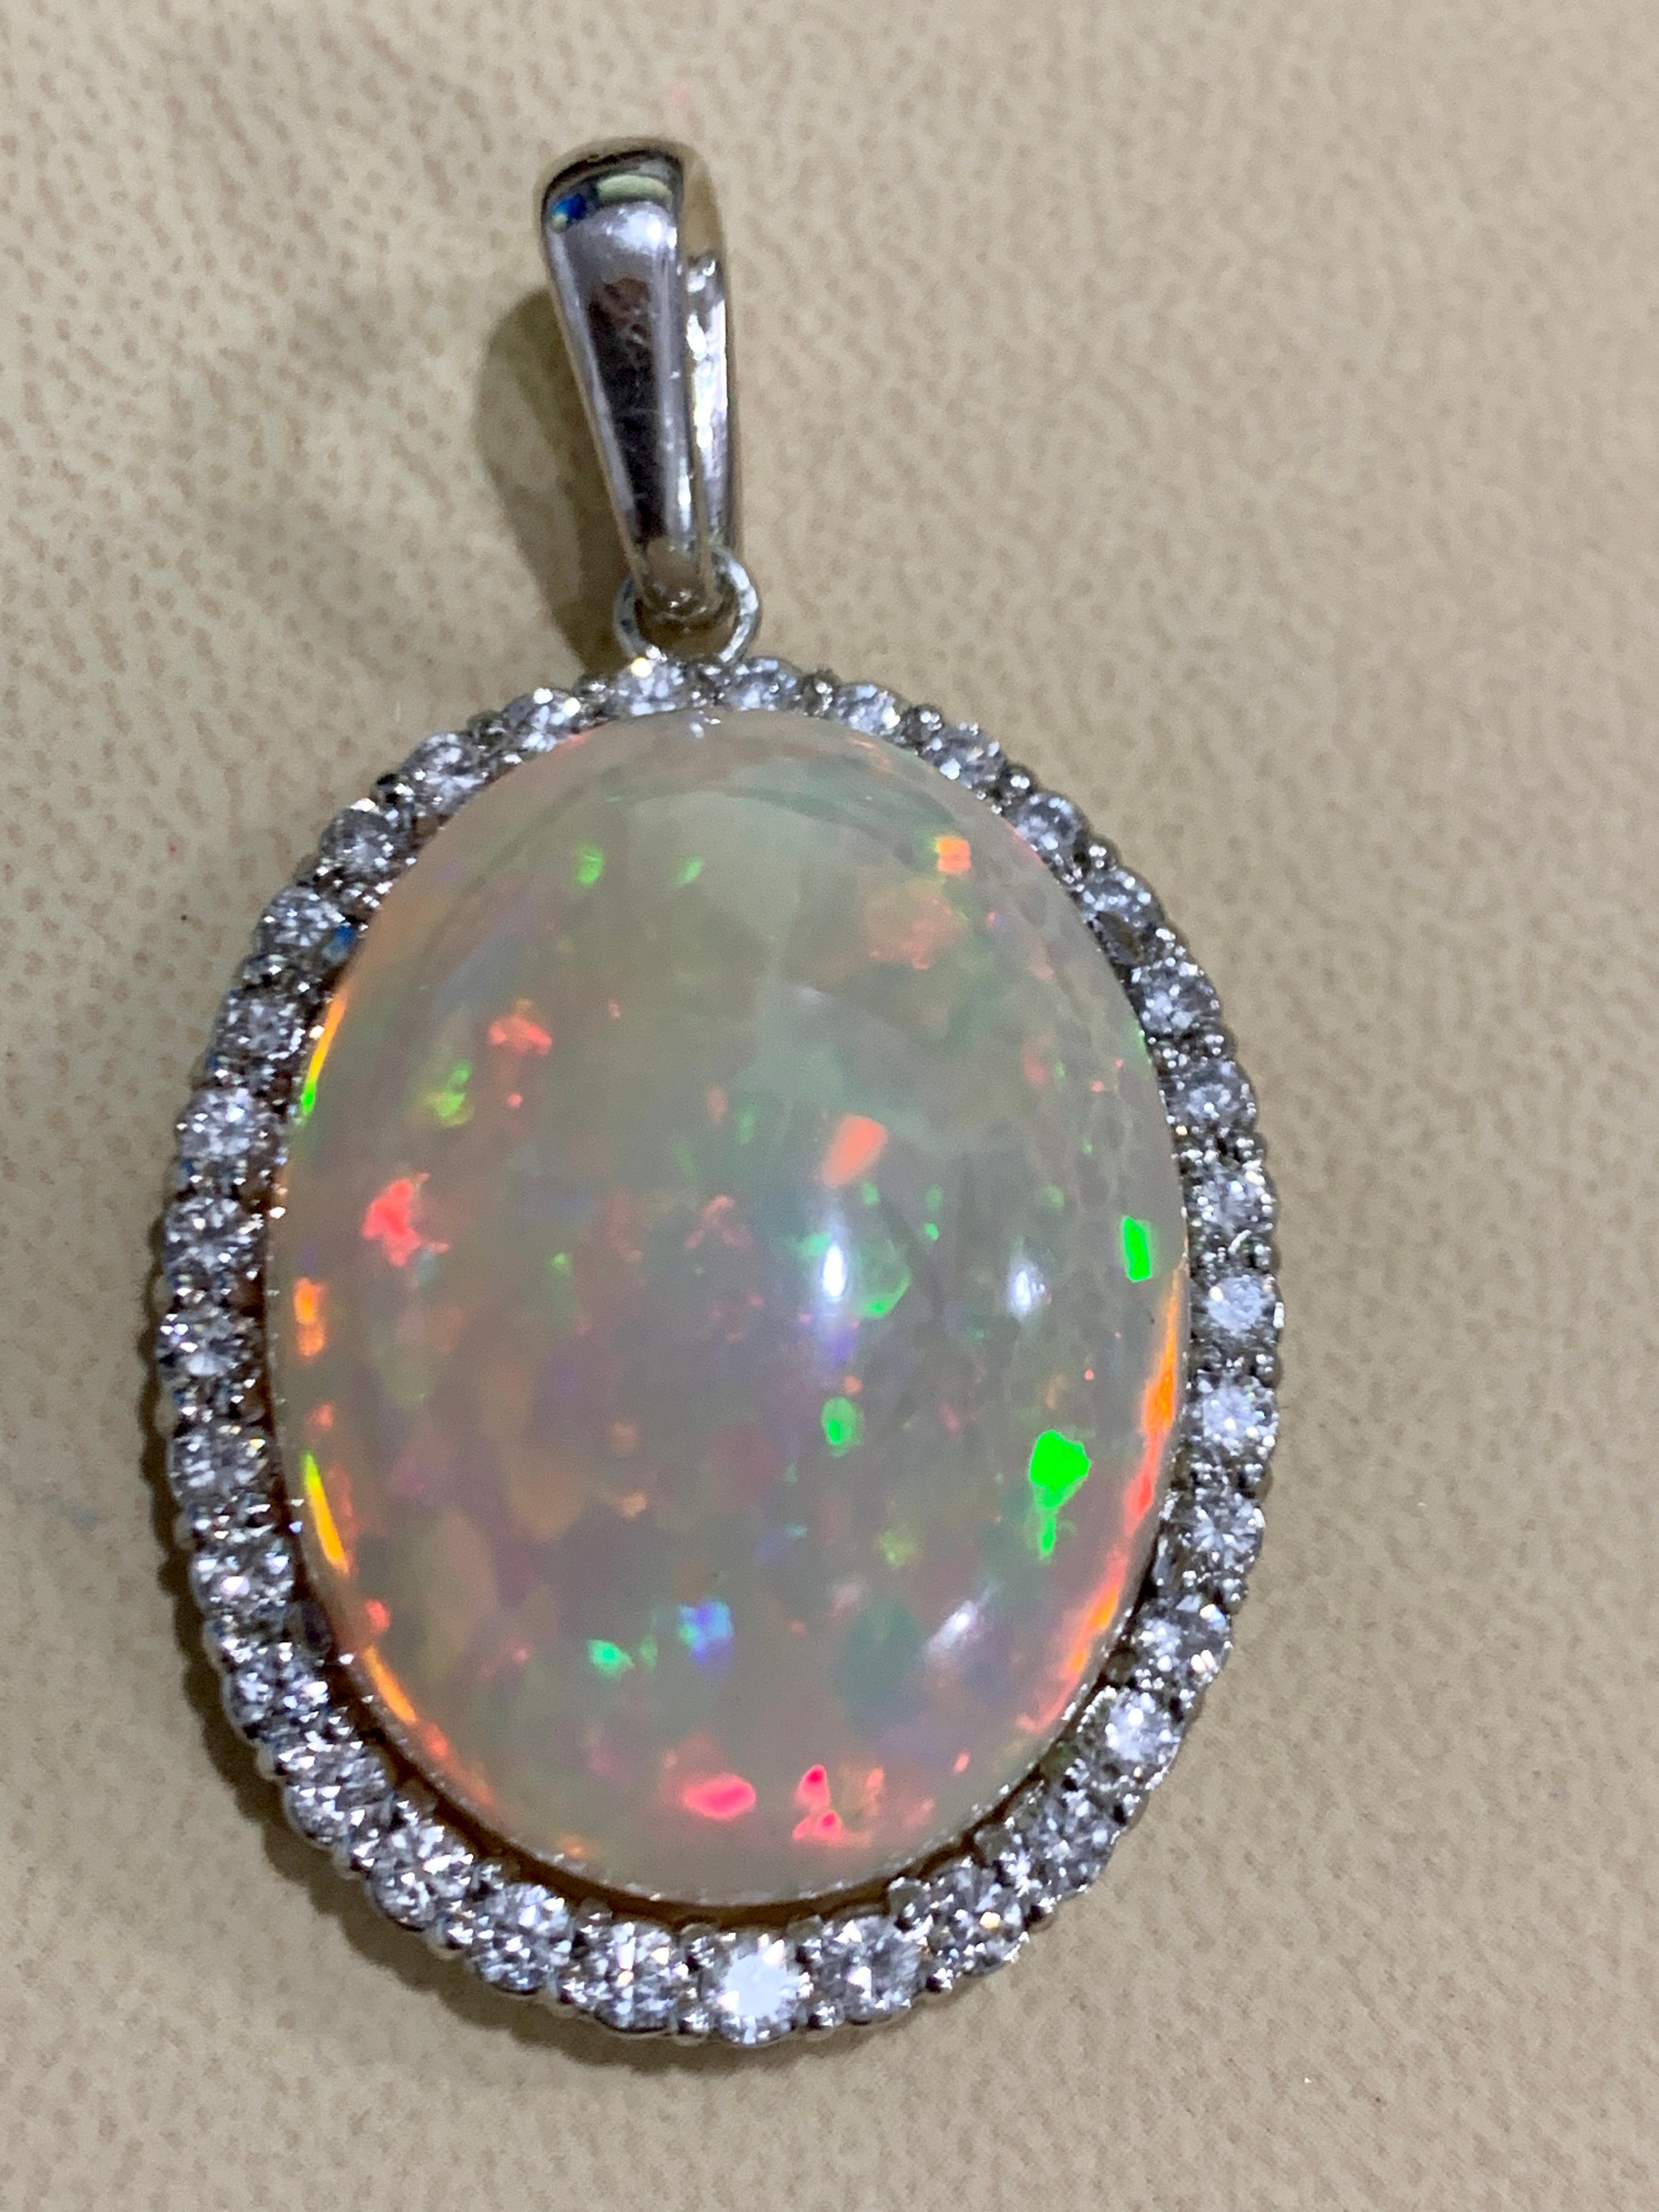 62 Carat Oval Ethiopian Opal &  3 carat Diamond Pendant / Necklace 14 Karat Gold Estate White Gold 
This spectacular Pendant Necklace consisting of a single Oval Shape Ethiopian Opal Approximately 62 Carat. The Opal is surrounded by approximately 3